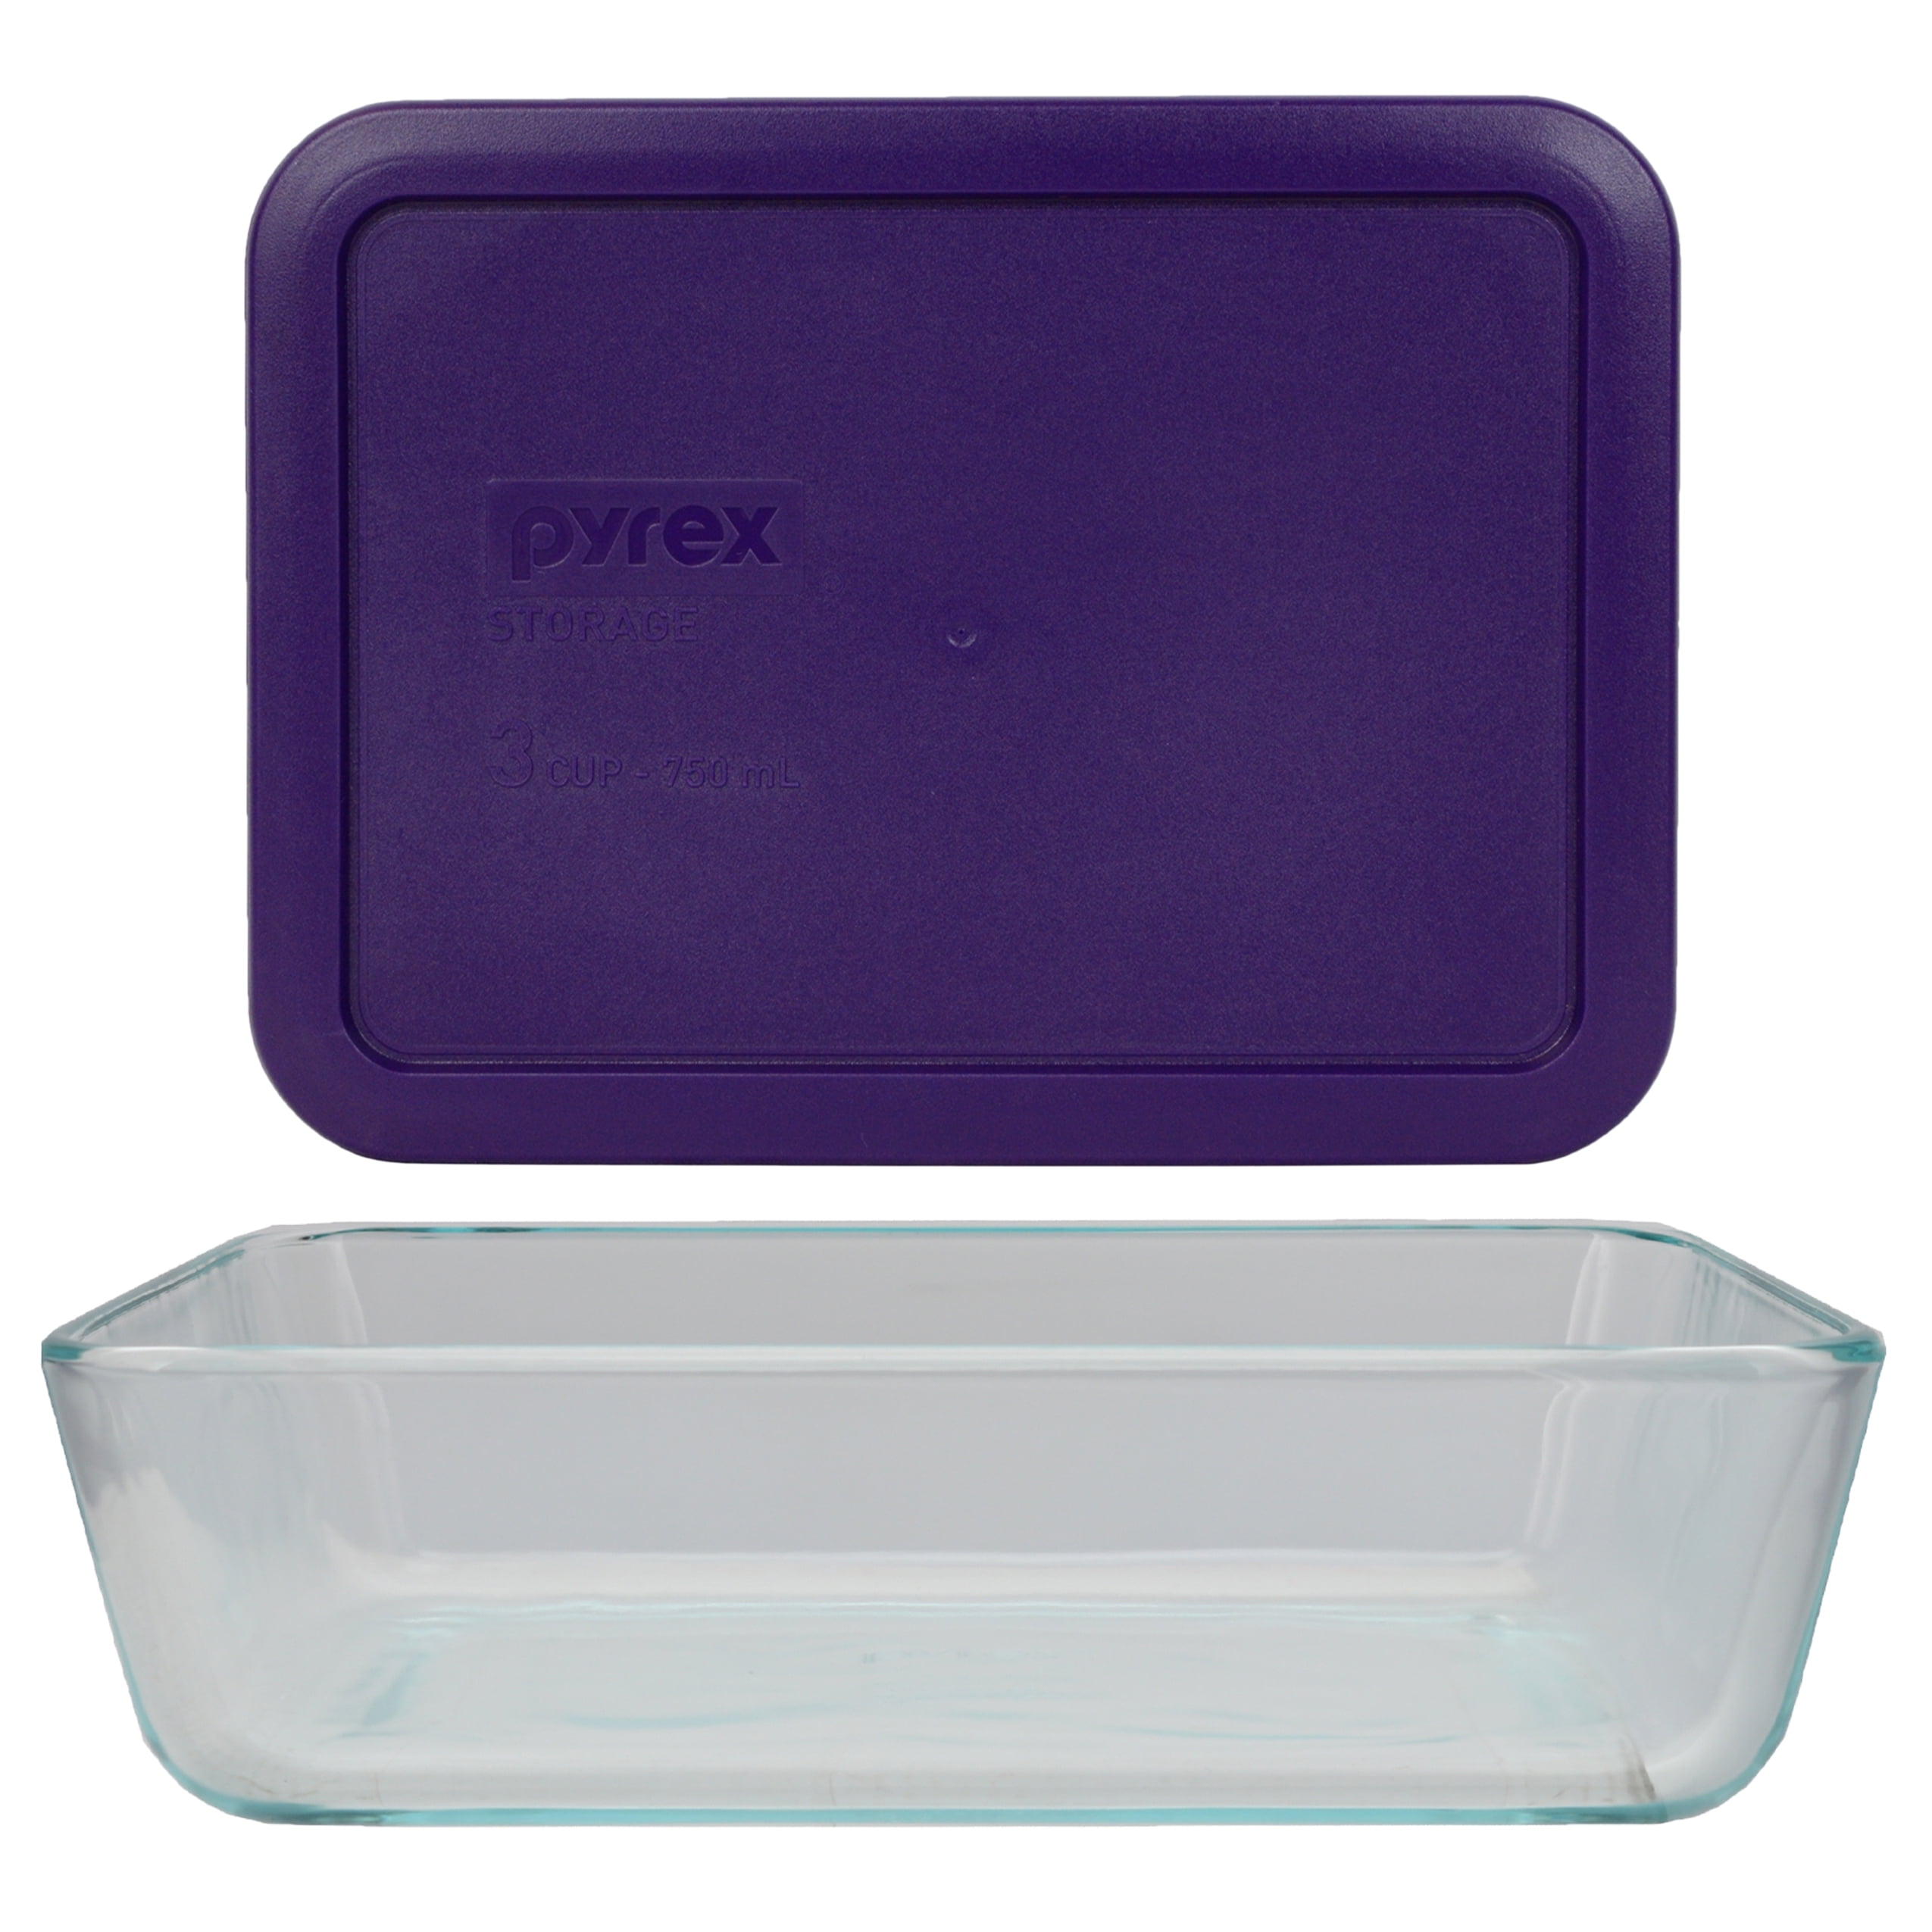 Pyrex 7210 3-Cup Glass Food Storage Dishes w/ 7210-PC 3-Cup Blue Lids (6-pack)